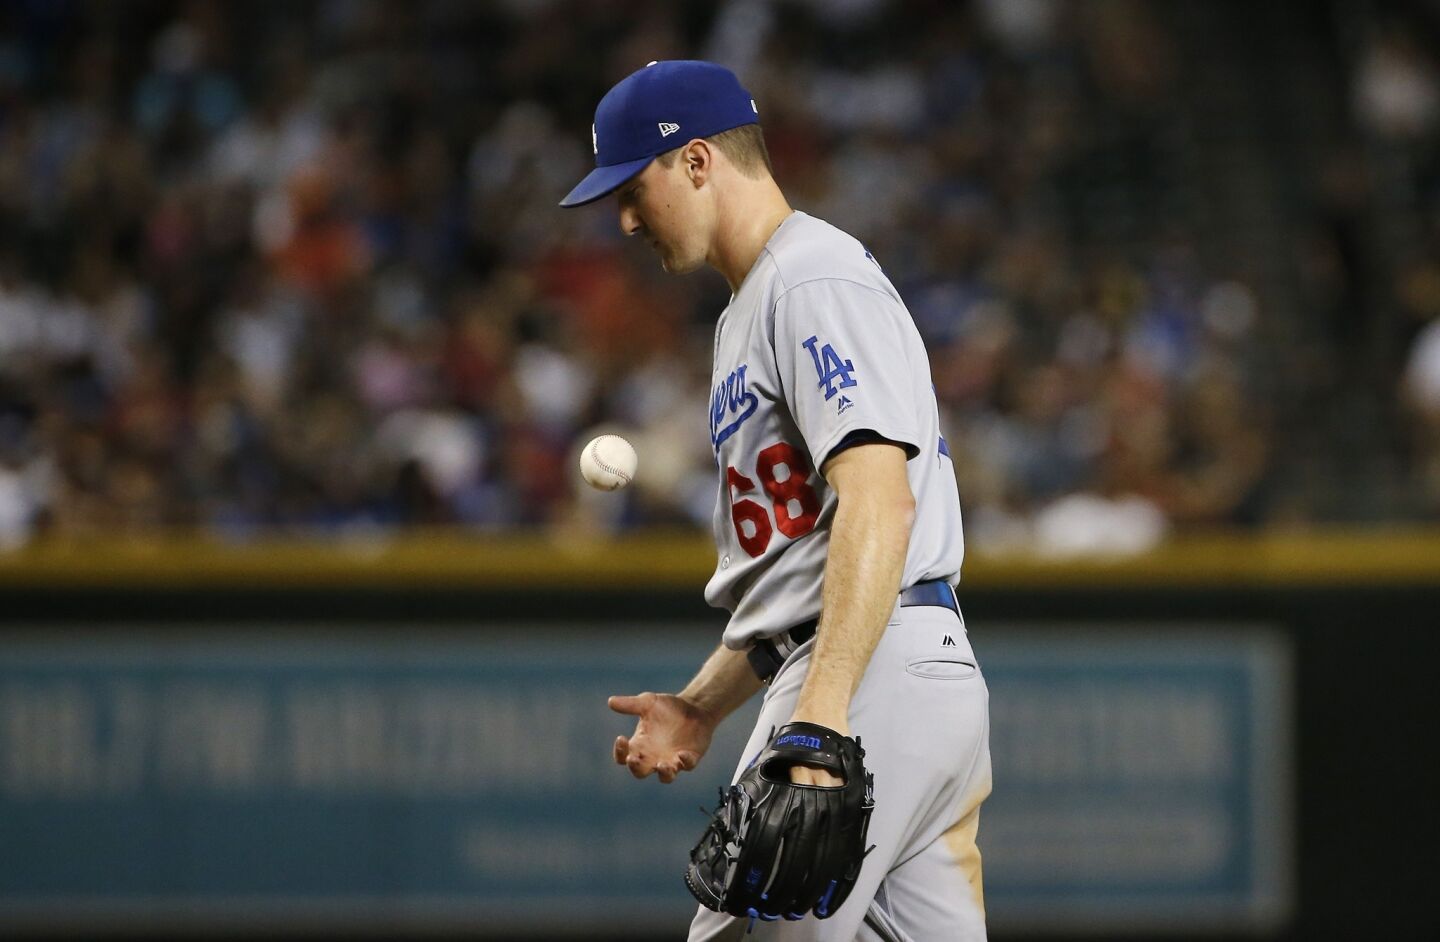 Los Angeles Dodgers pitcher Ross Stripling flips the ball in the air after giving up an RBI single to Arizona Diamondbacks' Zack Greinke during the second inning of a baseball game Wednesday, Sept. 26, 2018, in Phoenix. (AP Photo/Ross D. Franklin)